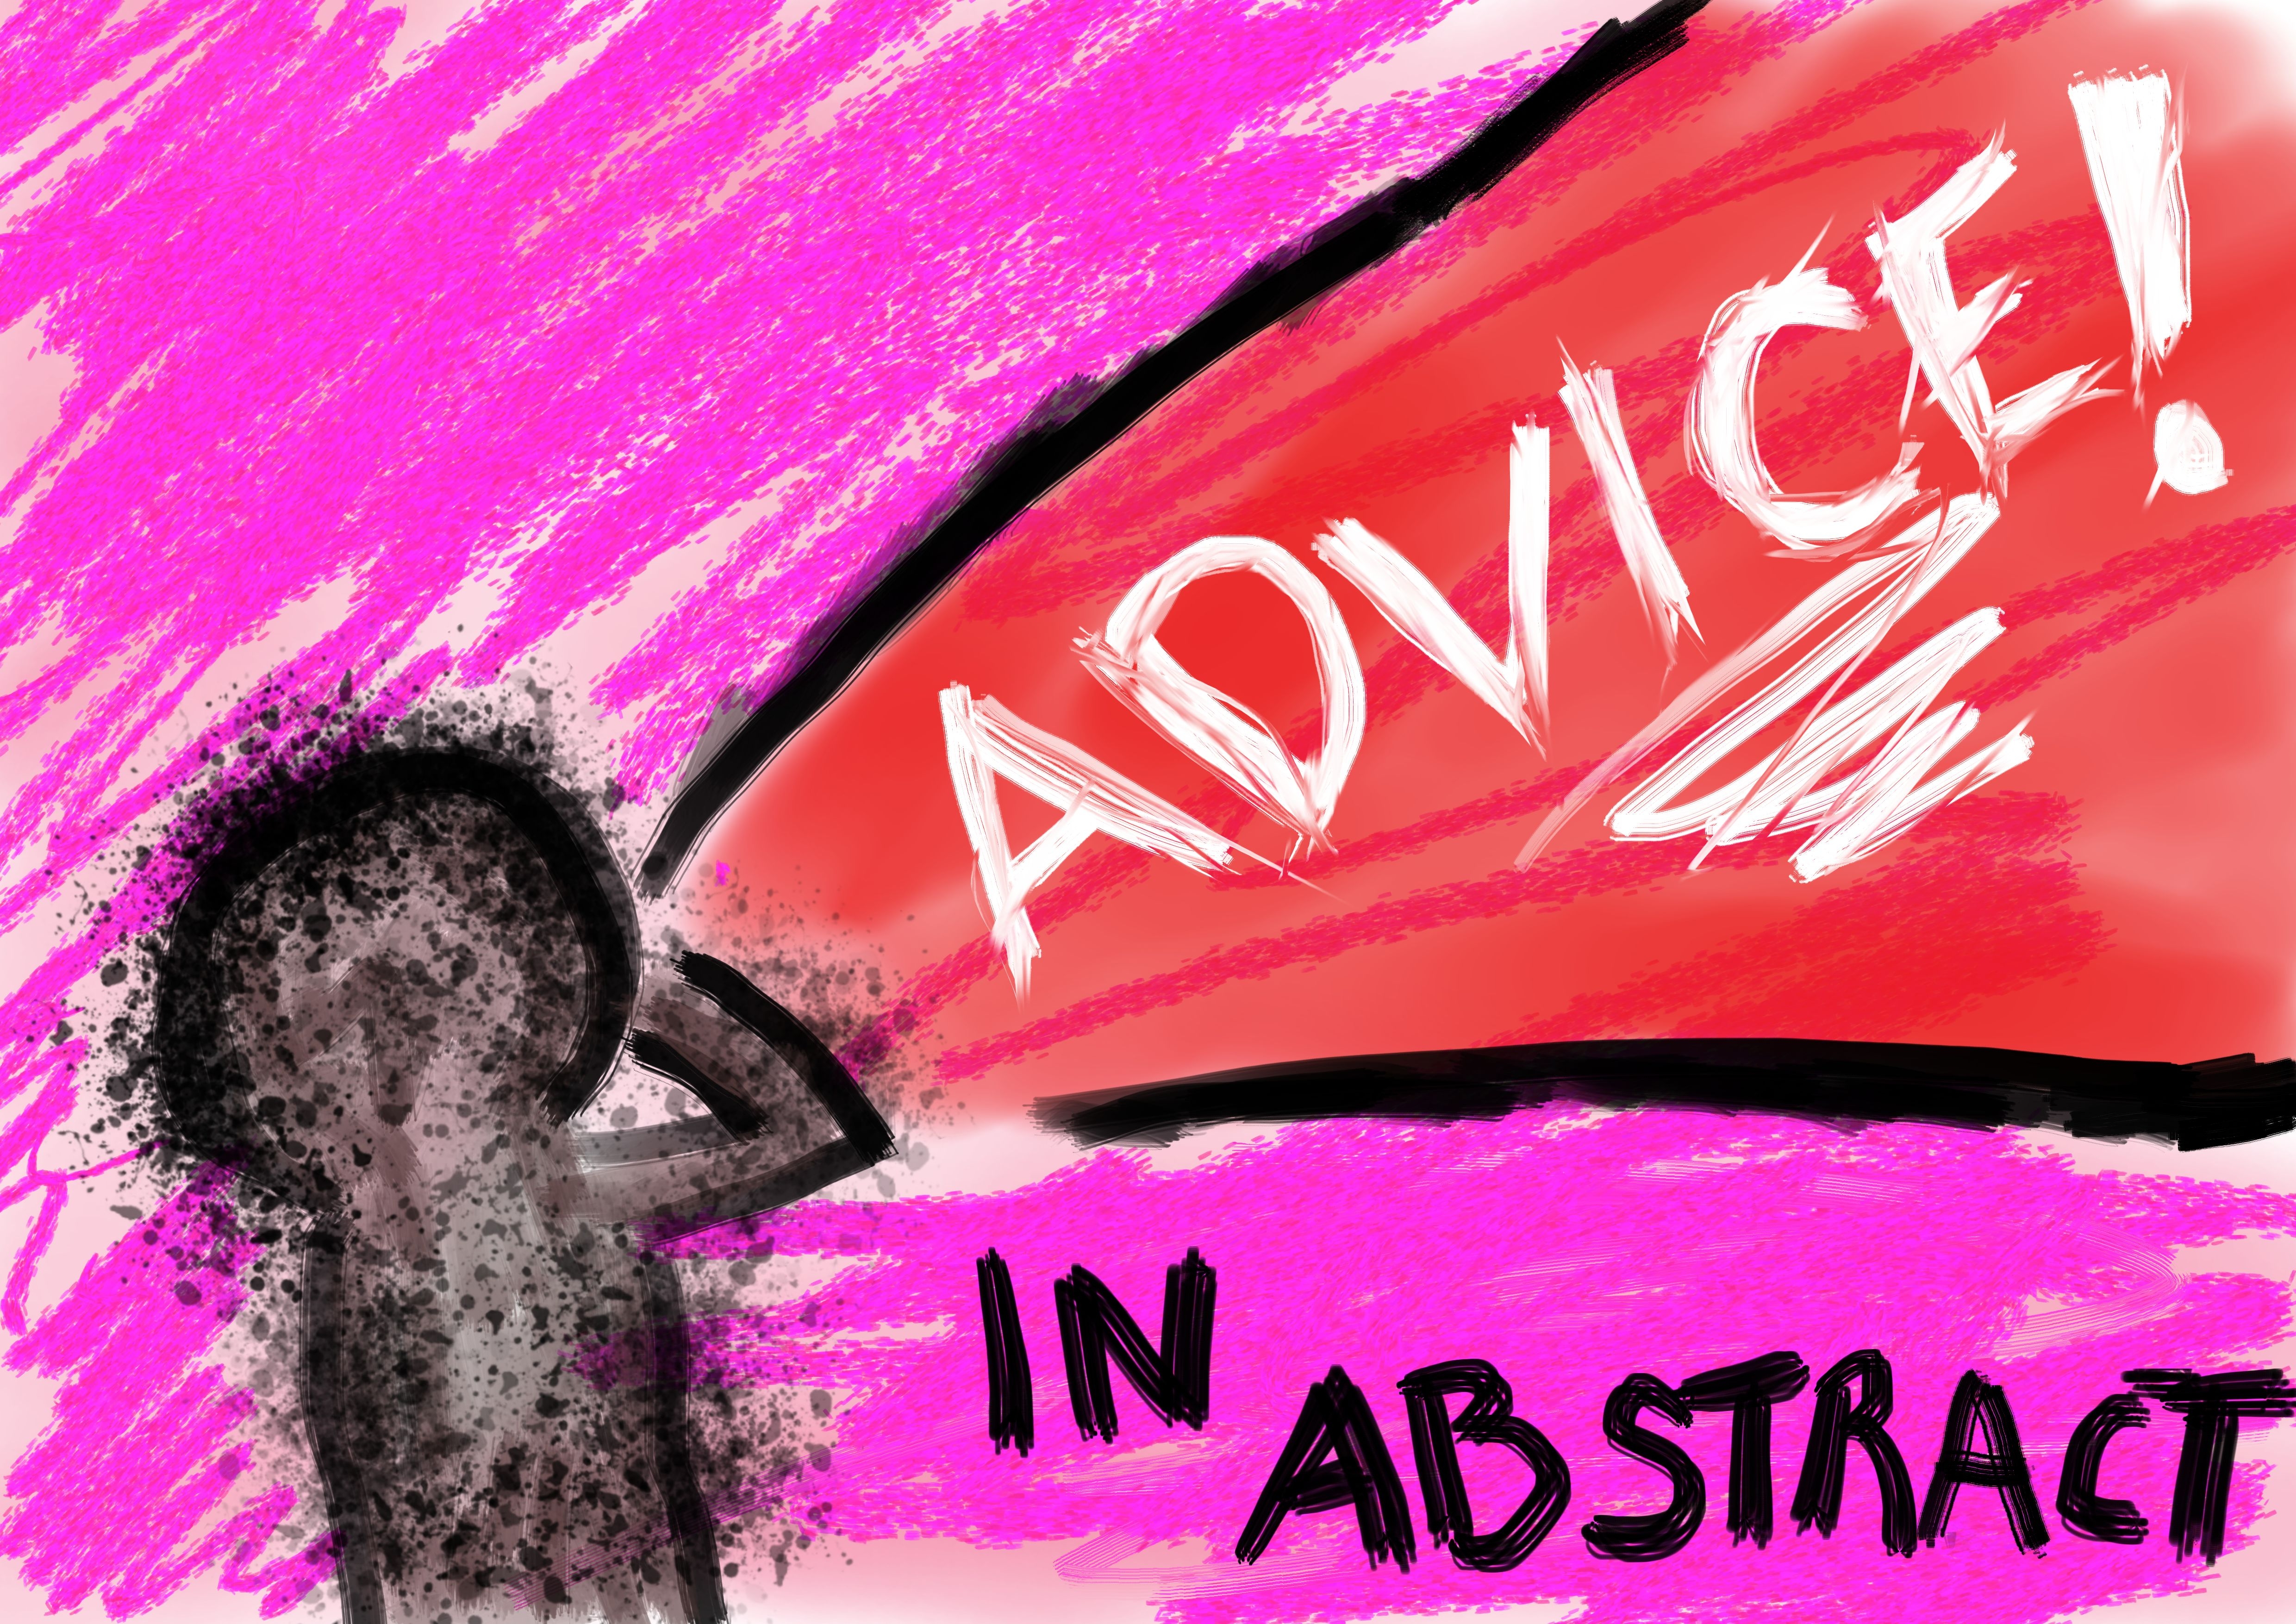 Advice in Abstract thumbnail